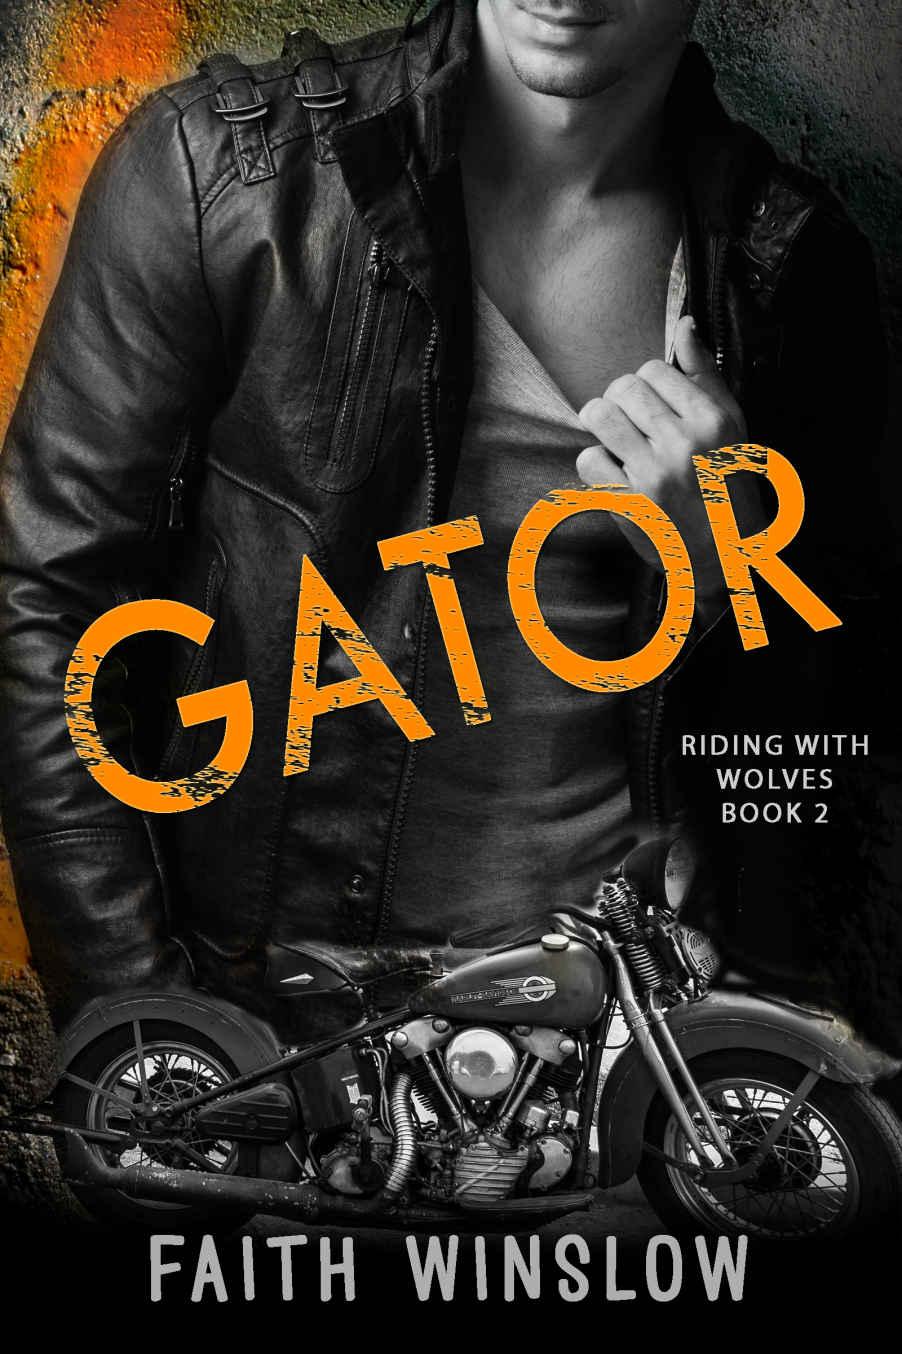 GATOR: Wolves MC (Riding With Wolves Book 2) by Faith Winslow